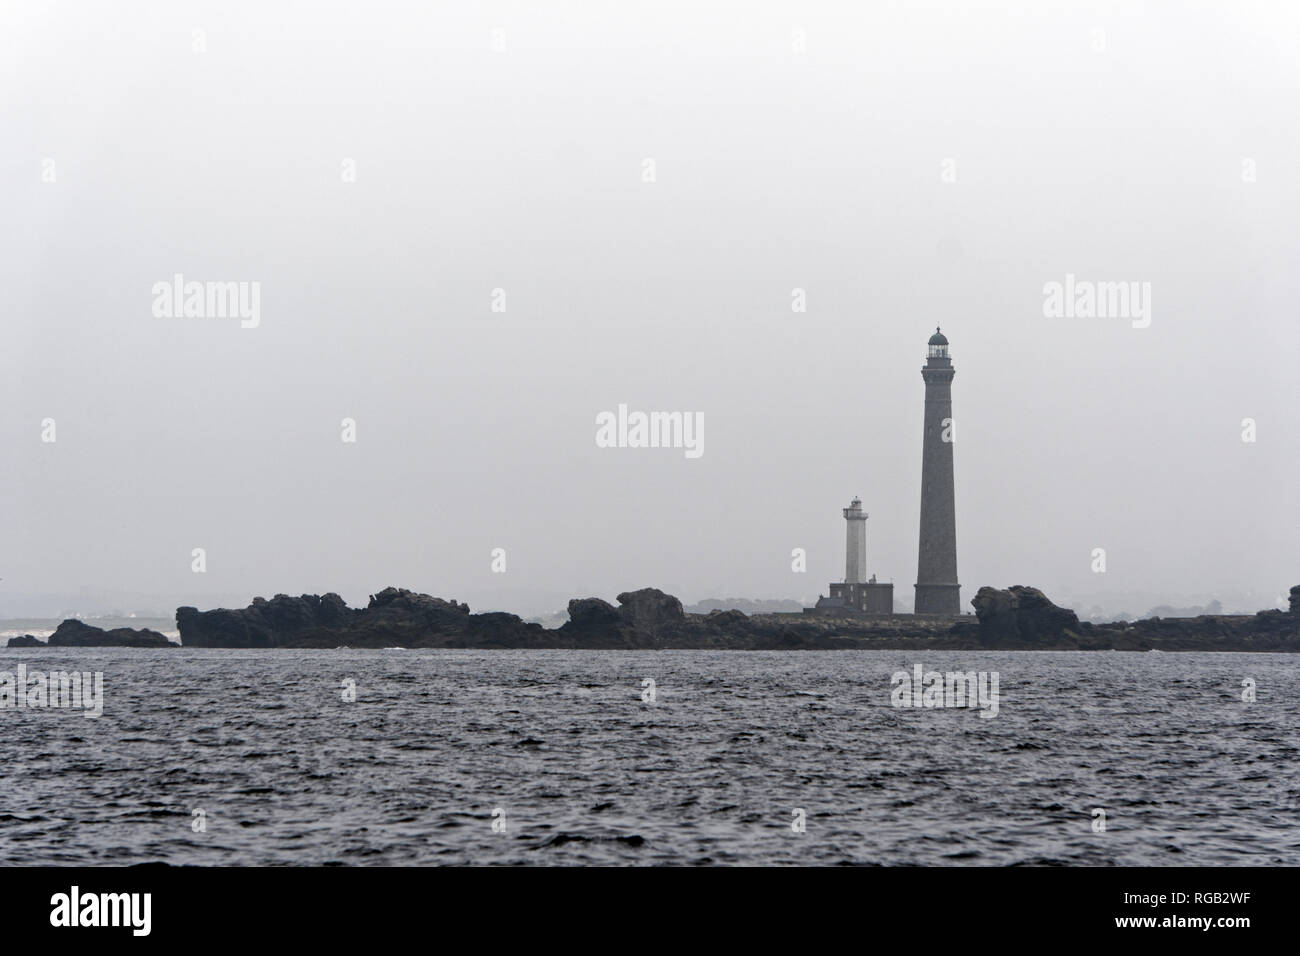 Ile Vierge lighthouse, the tallest in Brittany; France on a misty day. Photographed from the sea. Stock Photo